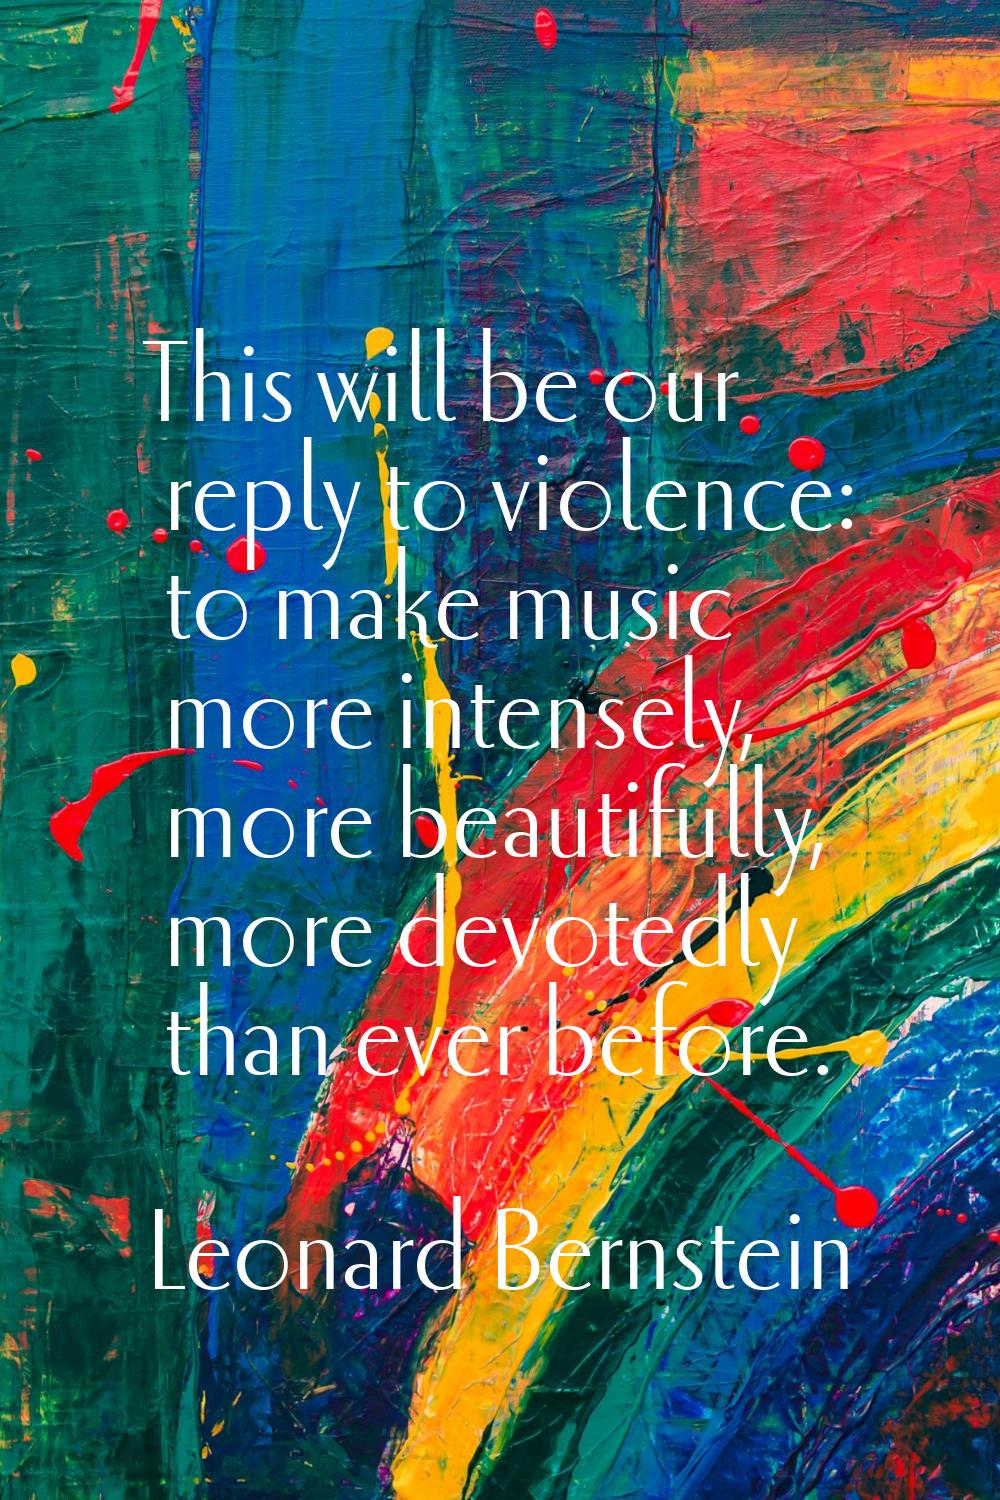 This will be our reply to violence: to make music more intensely, more beautifully, more devotedly 